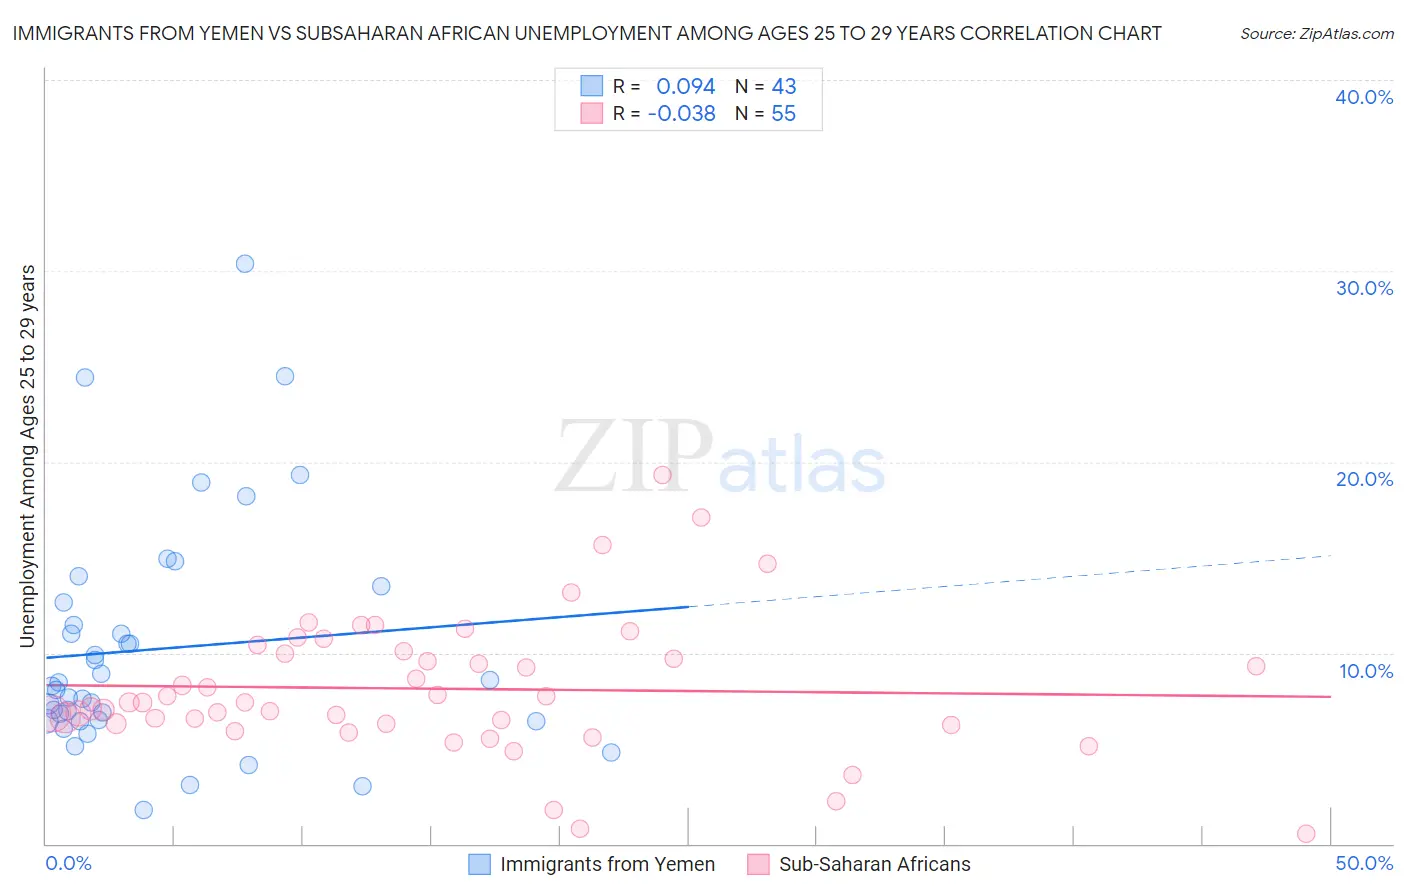 Immigrants from Yemen vs Subsaharan African Unemployment Among Ages 25 to 29 years